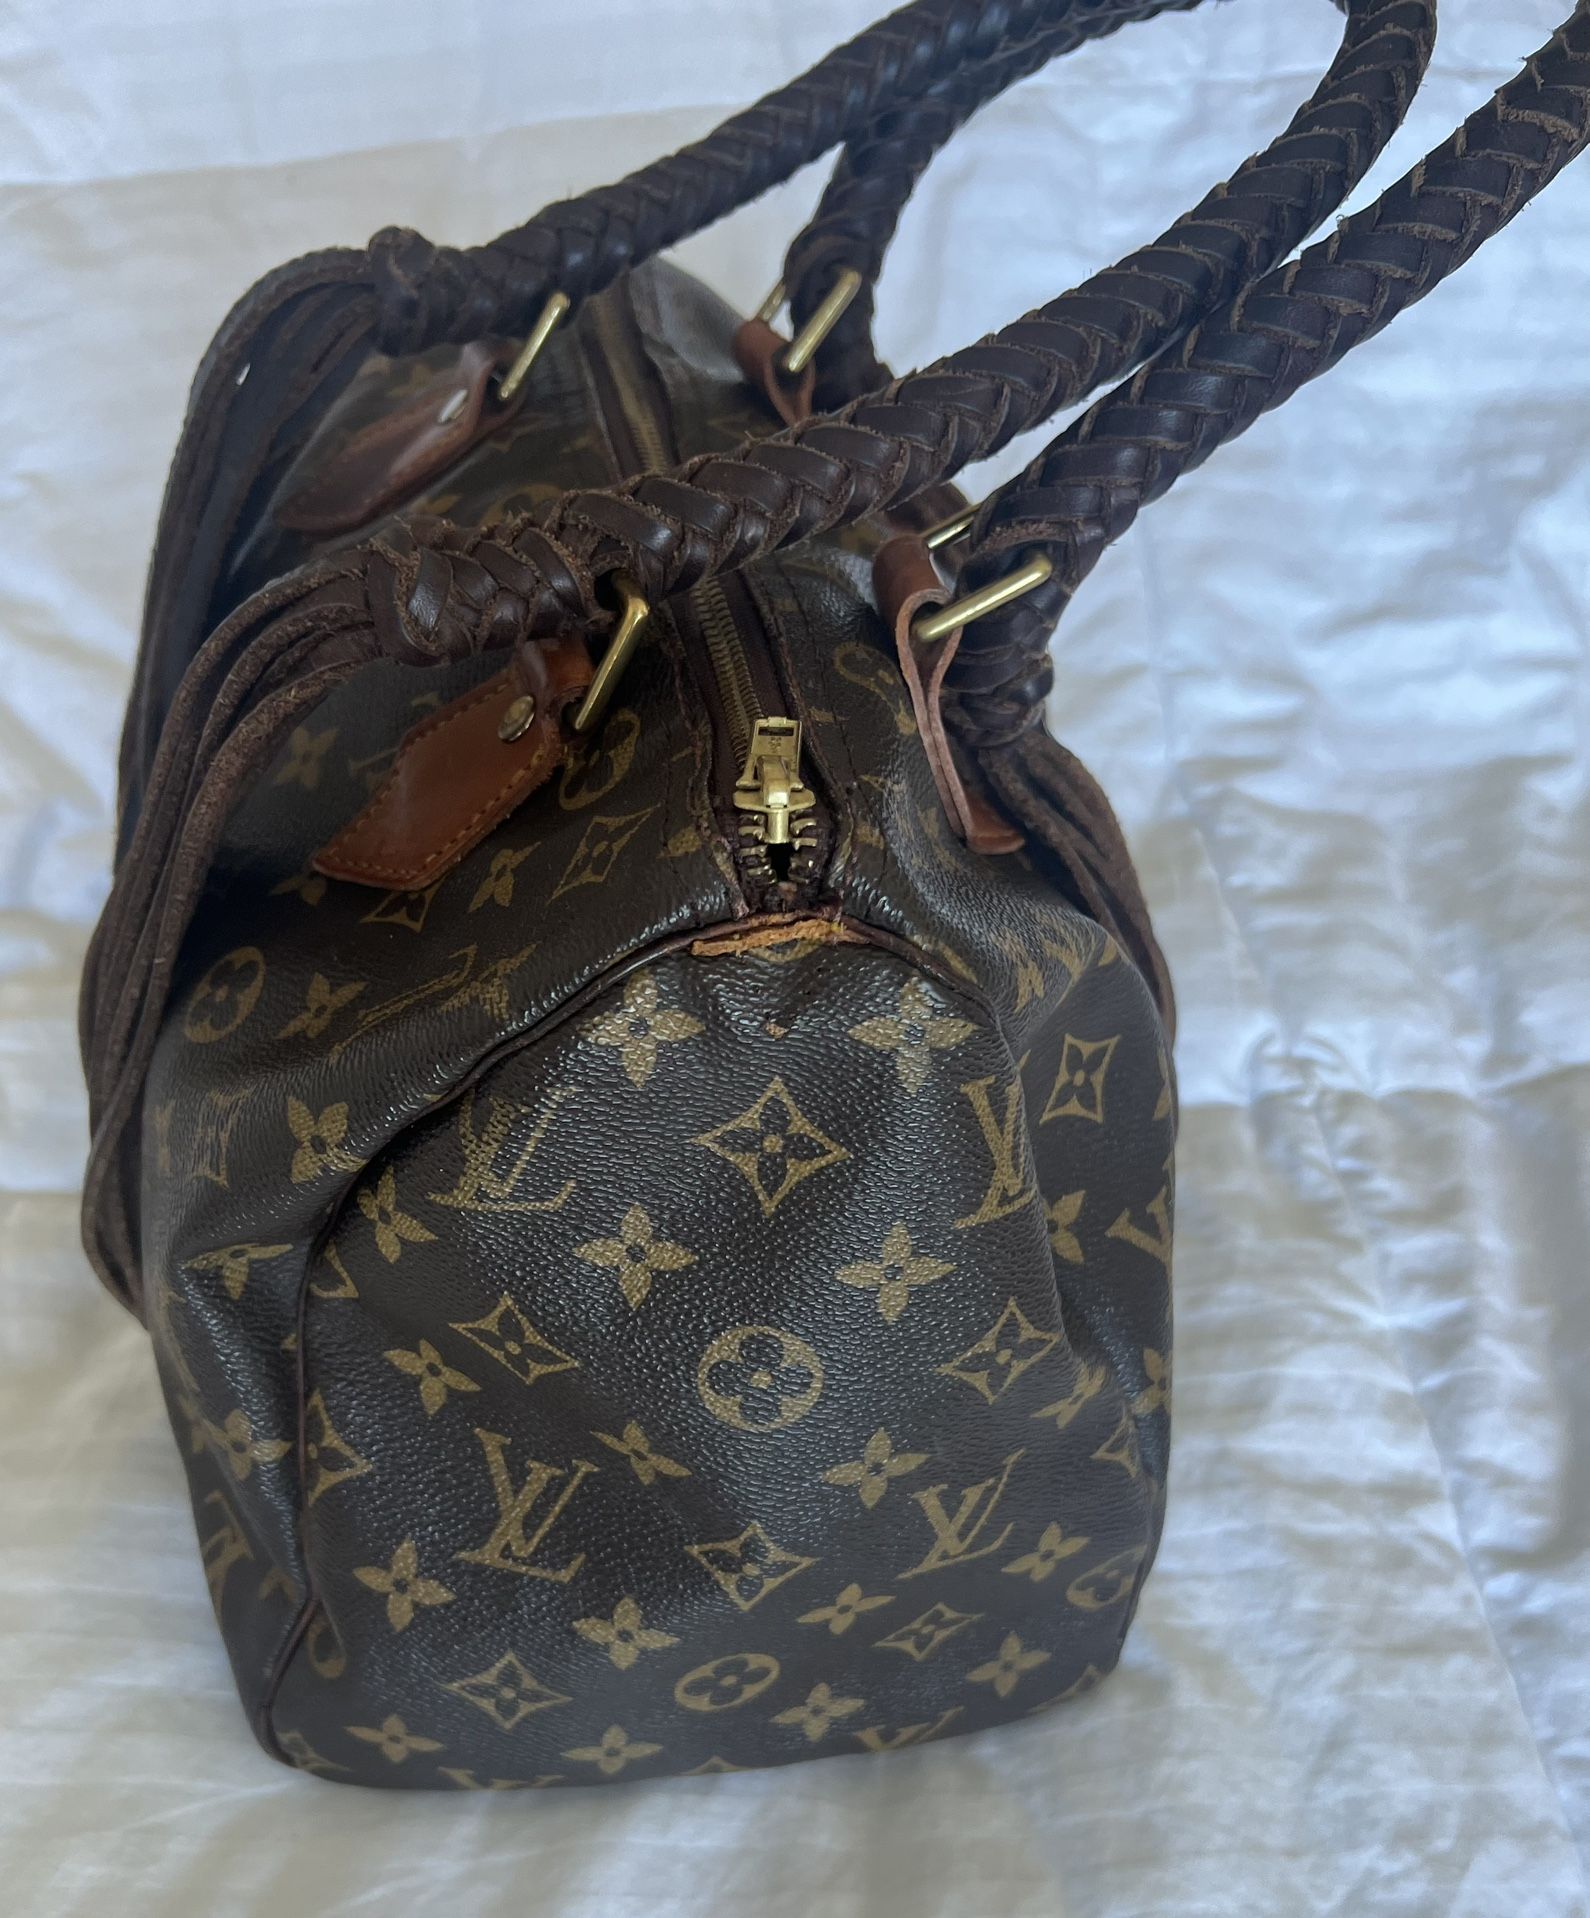 SEPTEMBER SALE - Authentic Louis Vuitton Mahina XL Hobo Purse $1900 ObO for  Sale in Addison, TX - OfferUp